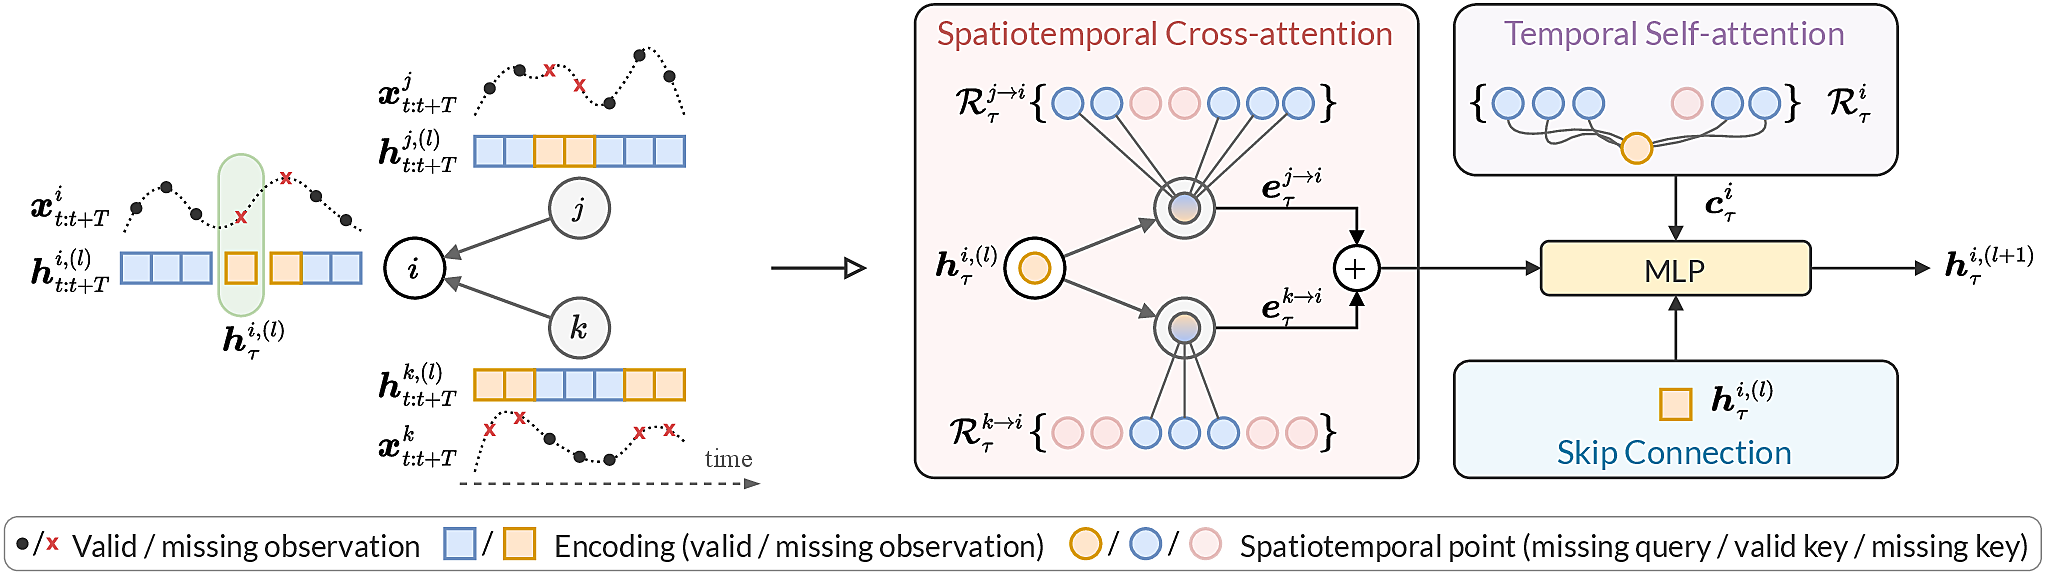 Example of the sparse spatiotemporal attention layer.